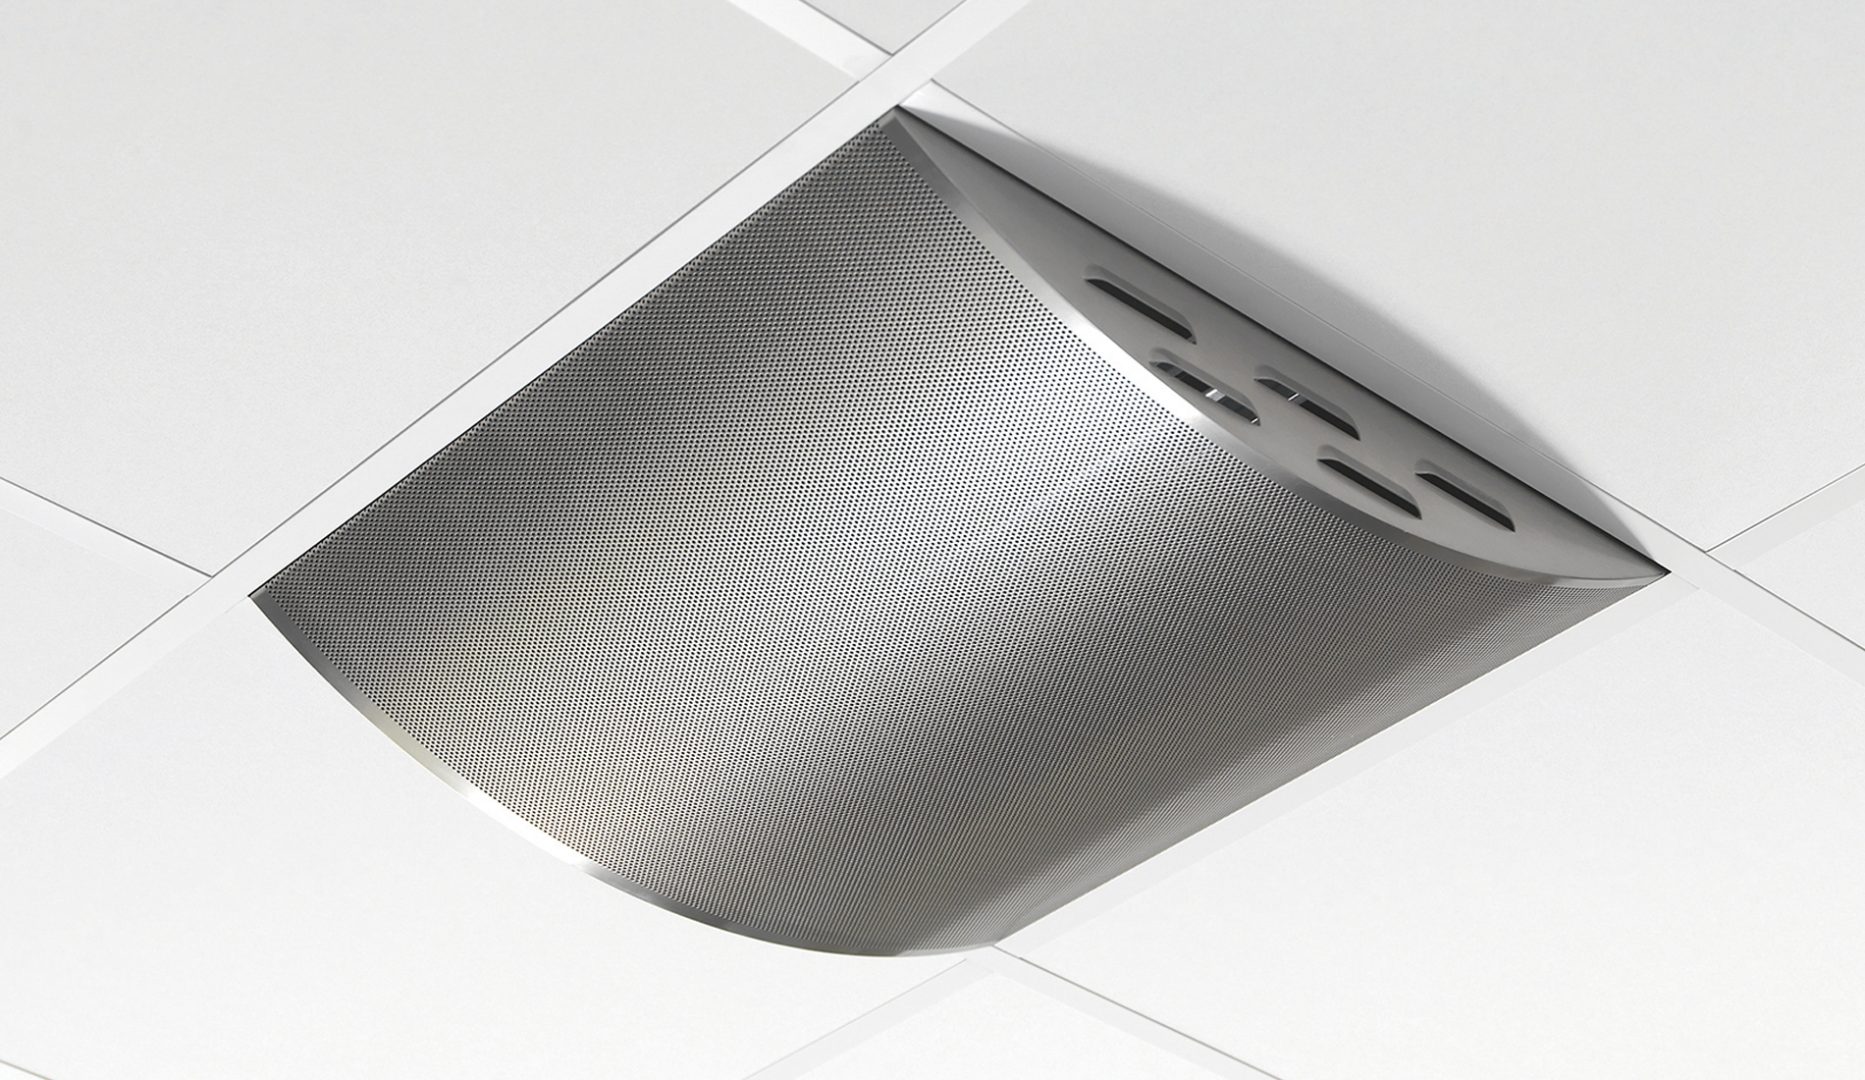 KCD kitchen ceiling diffuser